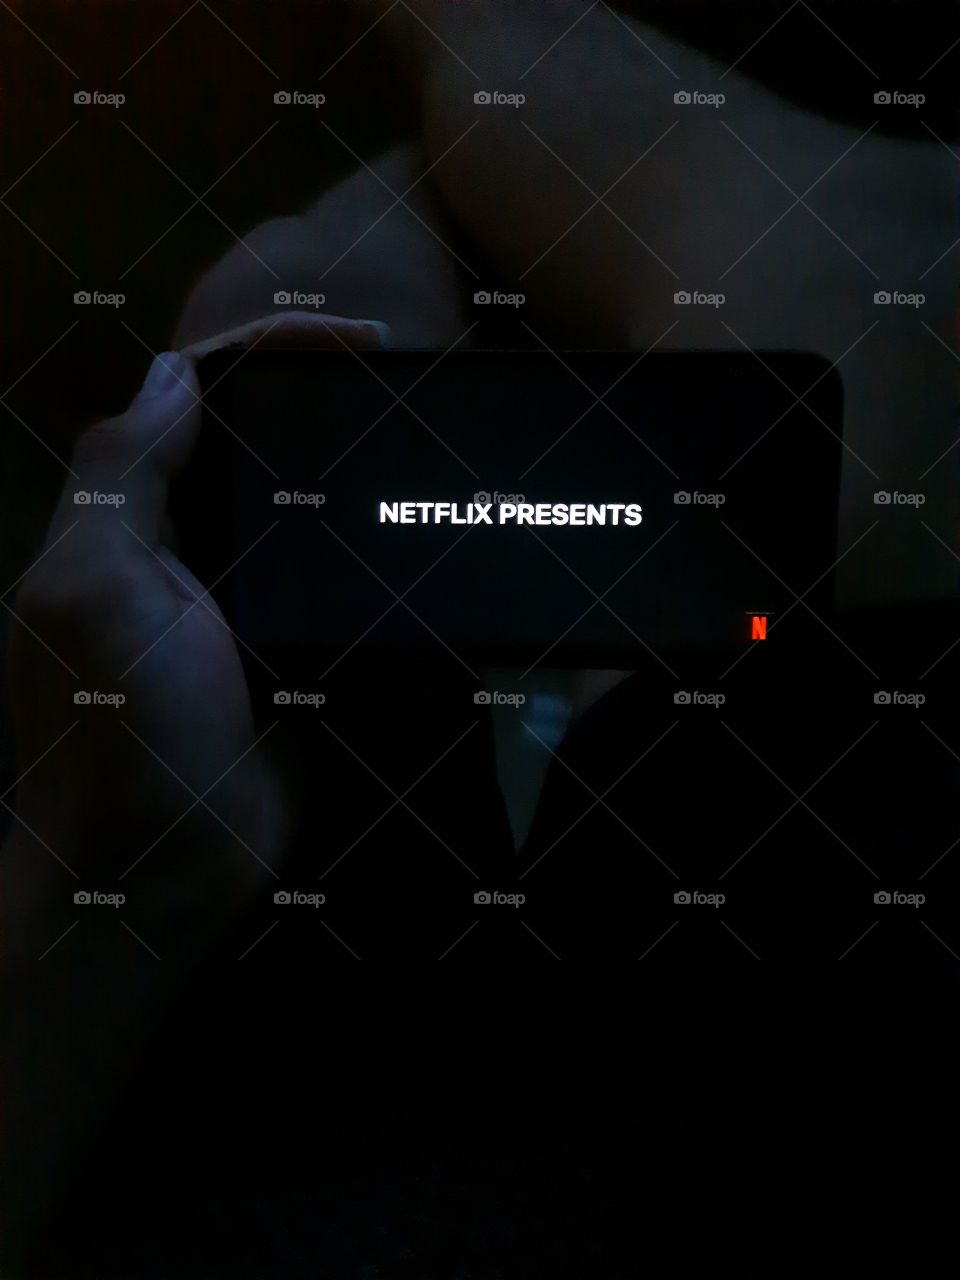 Netflix and Chill.... Watching netflix on mobile.. Evening chill time... enjoying alone... new series or new trailer...